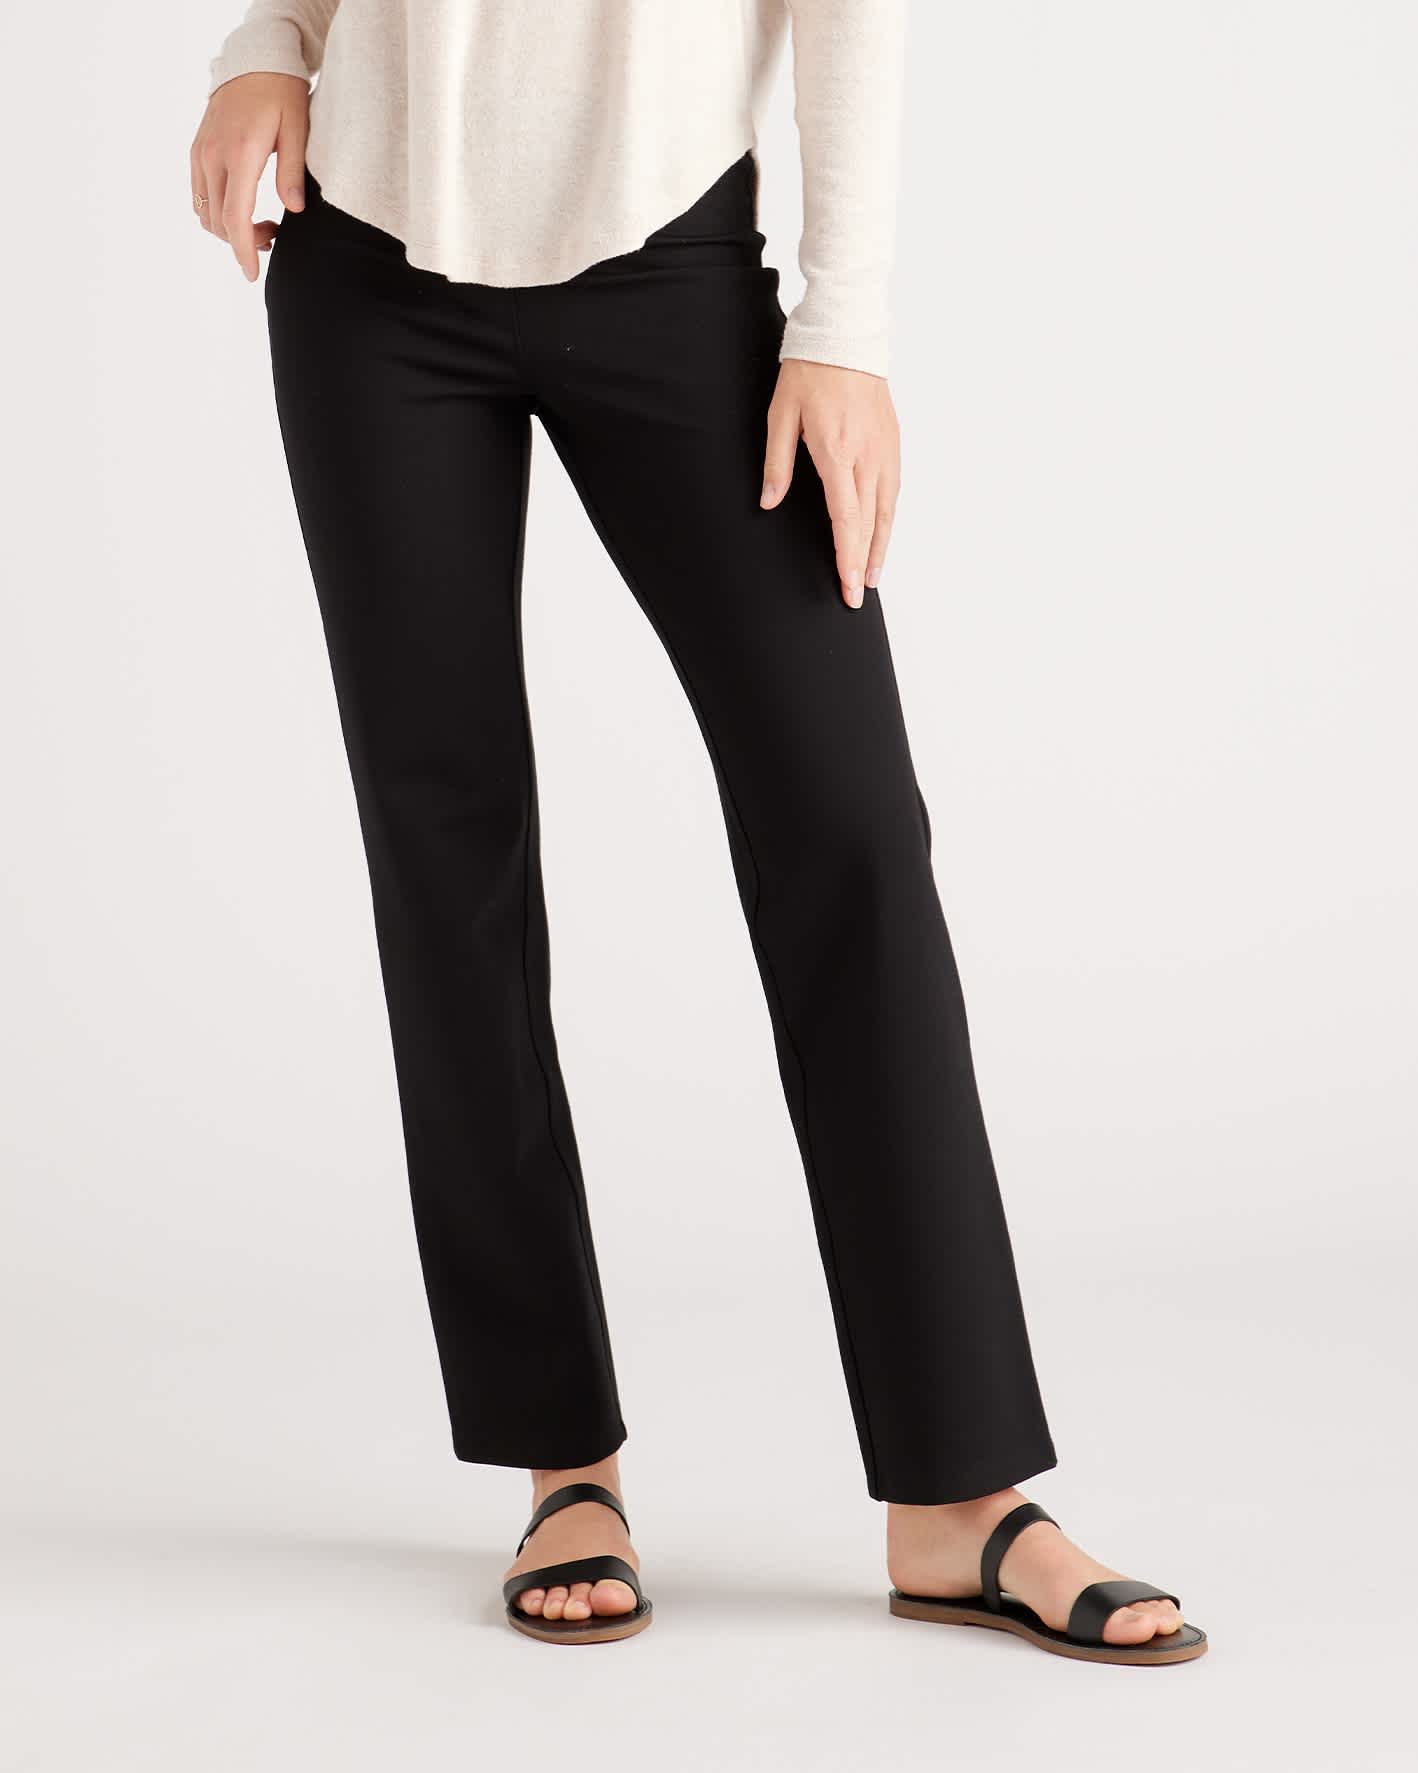 You May Also Like - Ultra-Stretch Ponte Straight Leg Pant - Regular - Black